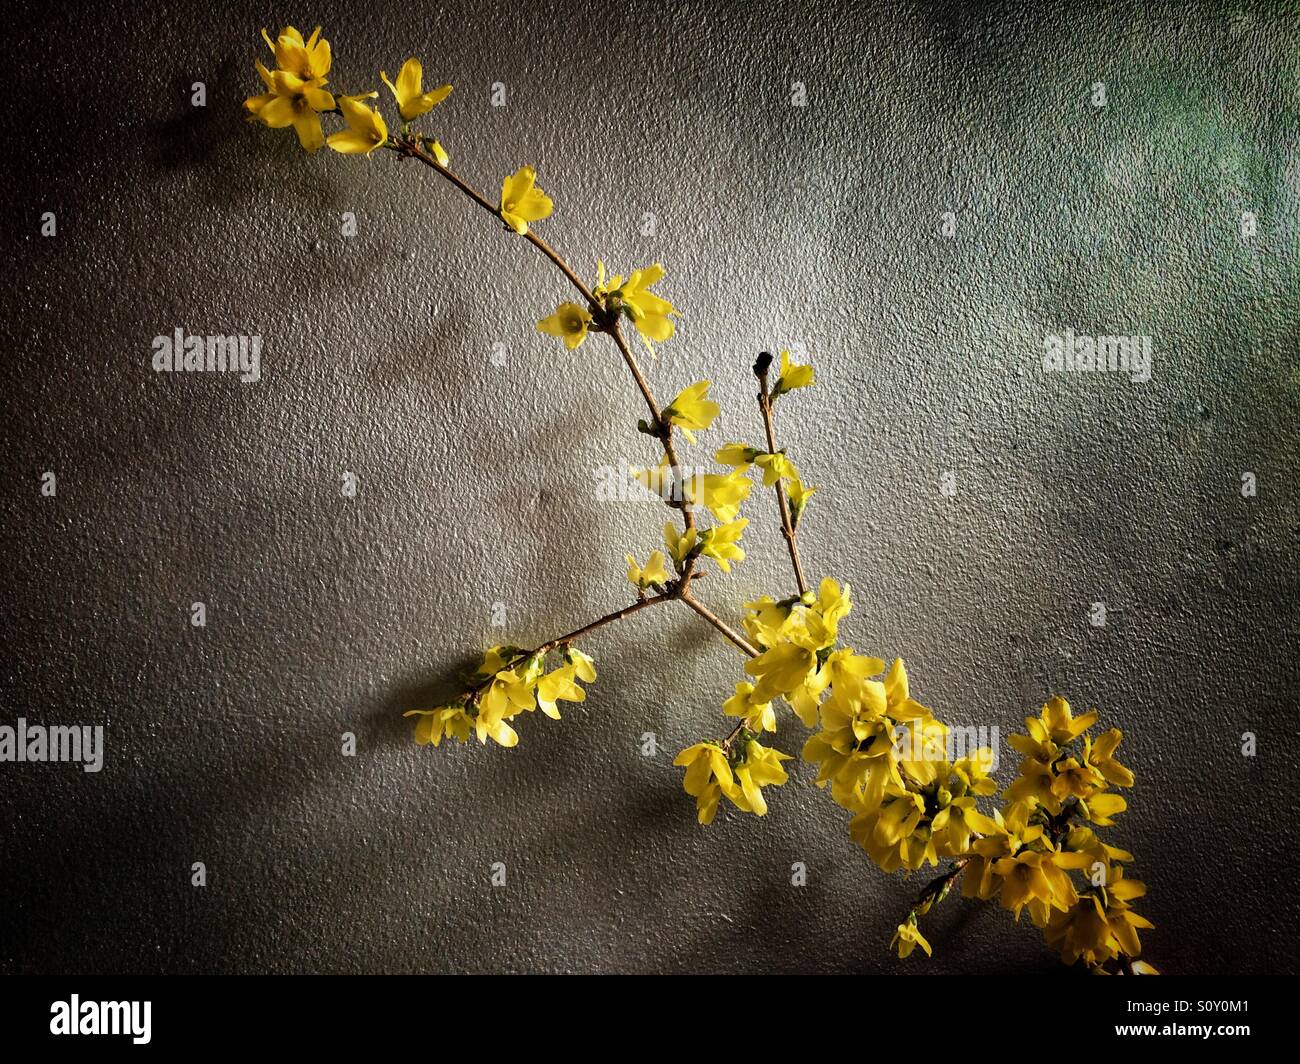 A sprig of flowering Forsythia against a textured silver grey background Stock Photo